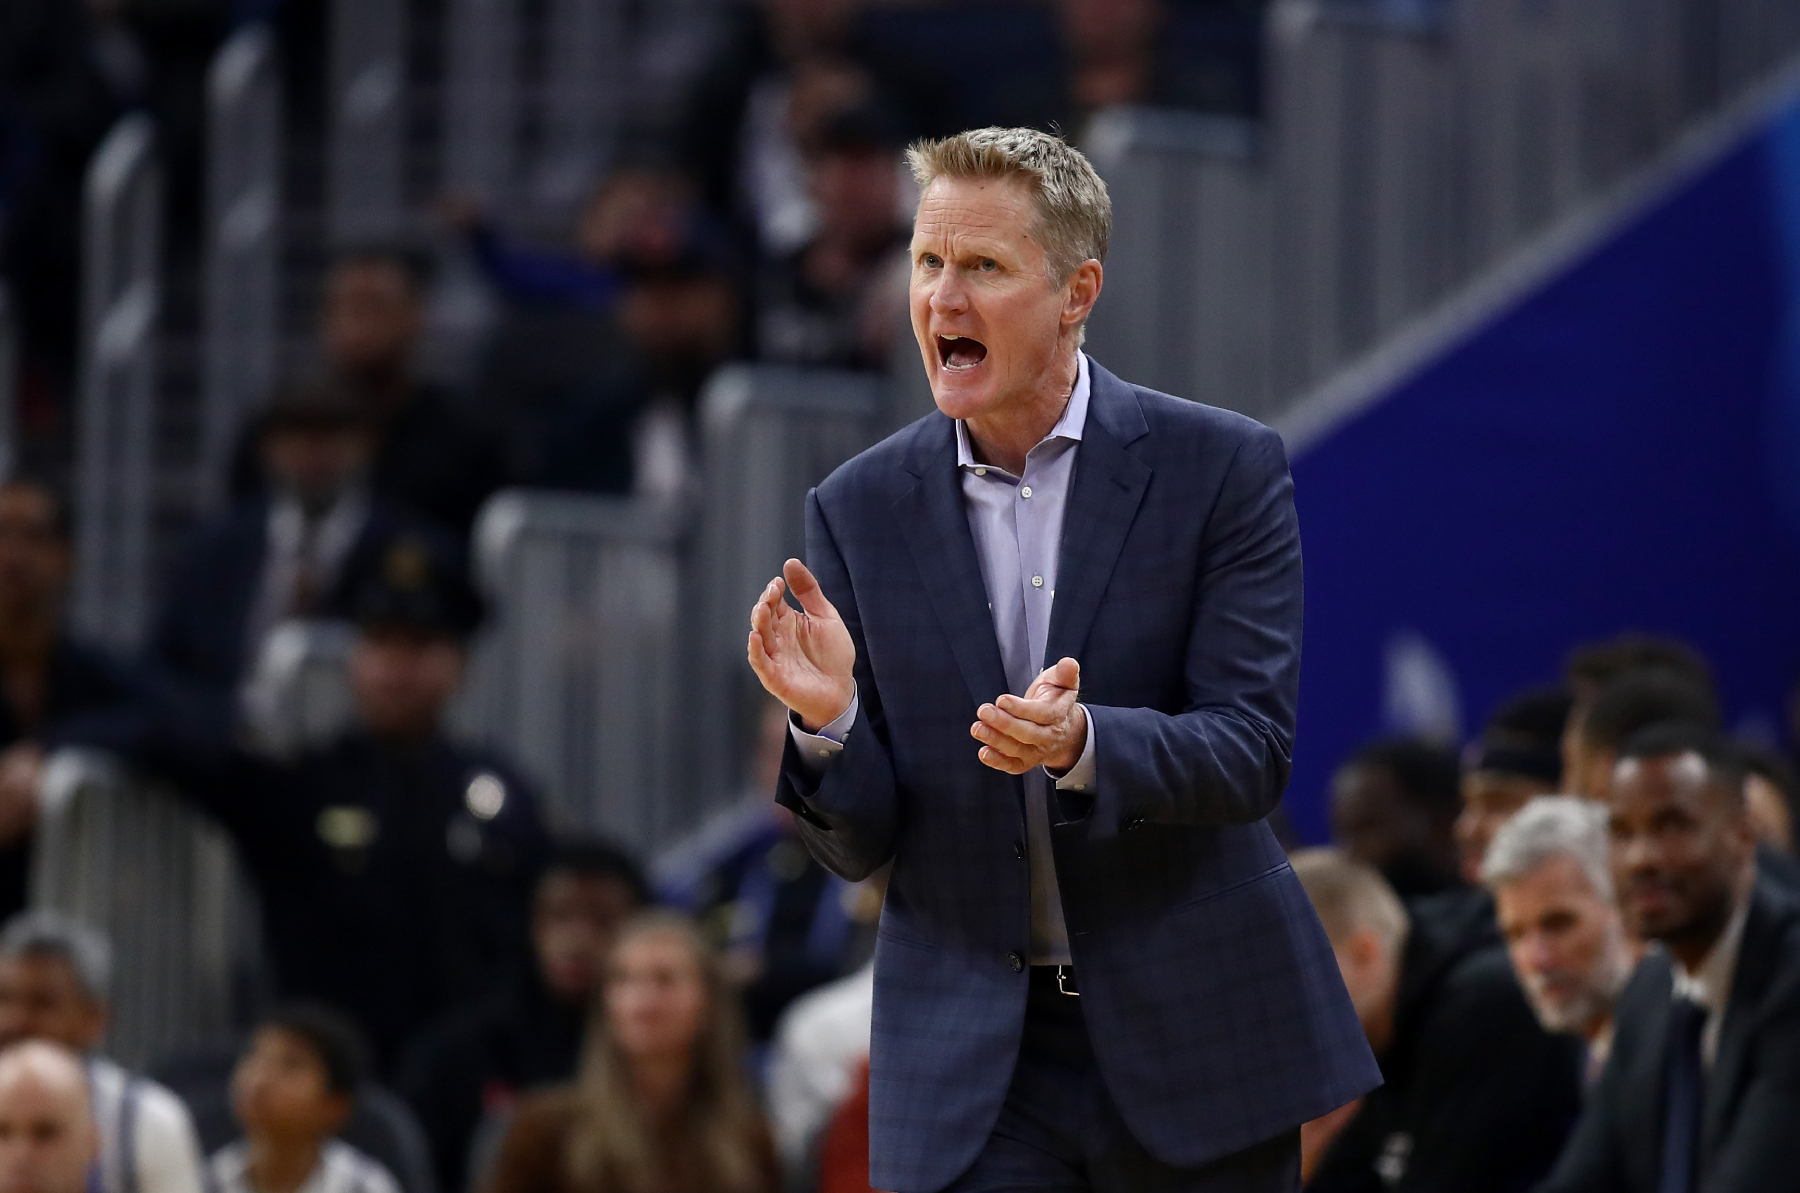 The Golden State Warriors hope to be atop the NBA again in 2020-21. Head coach Steve Kerr recently revealed his plan for them.